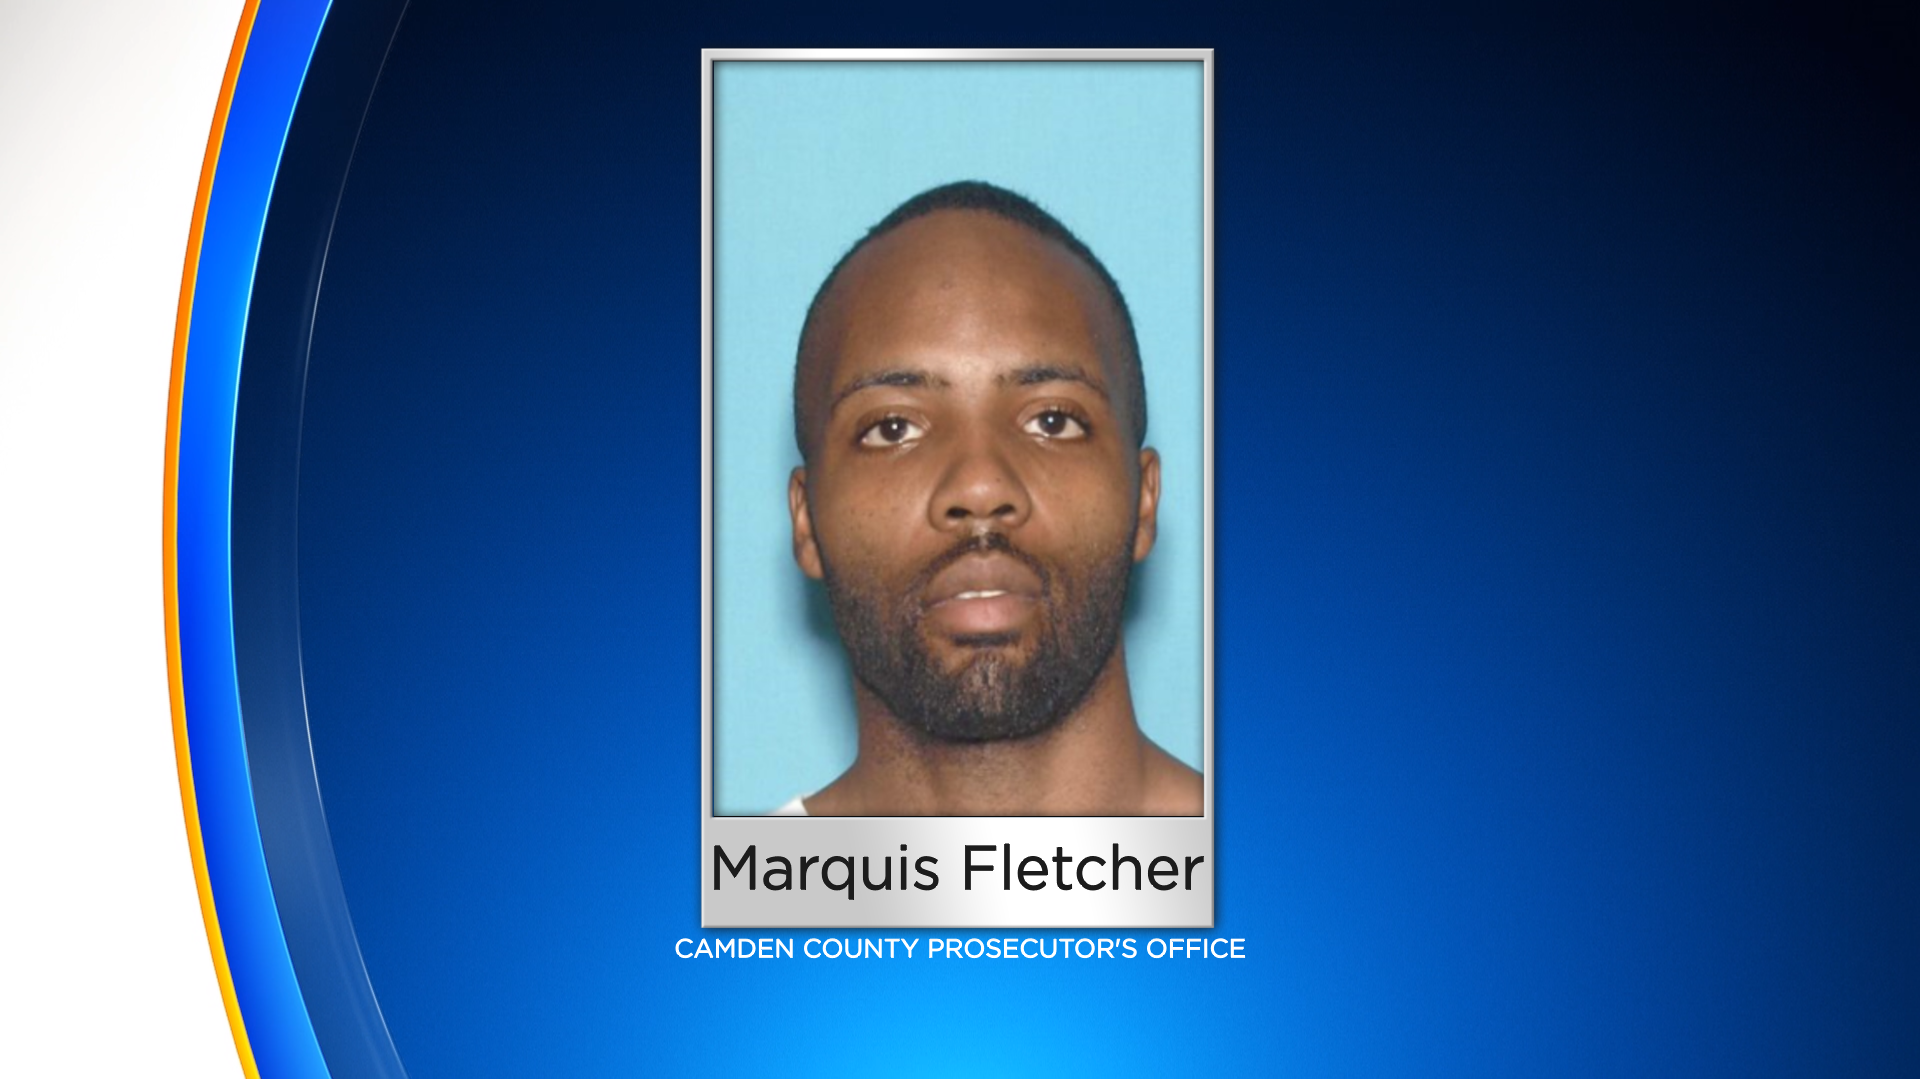 Marquis Fletcher Charged With Murder For Shooting, Killing Woman In Camden